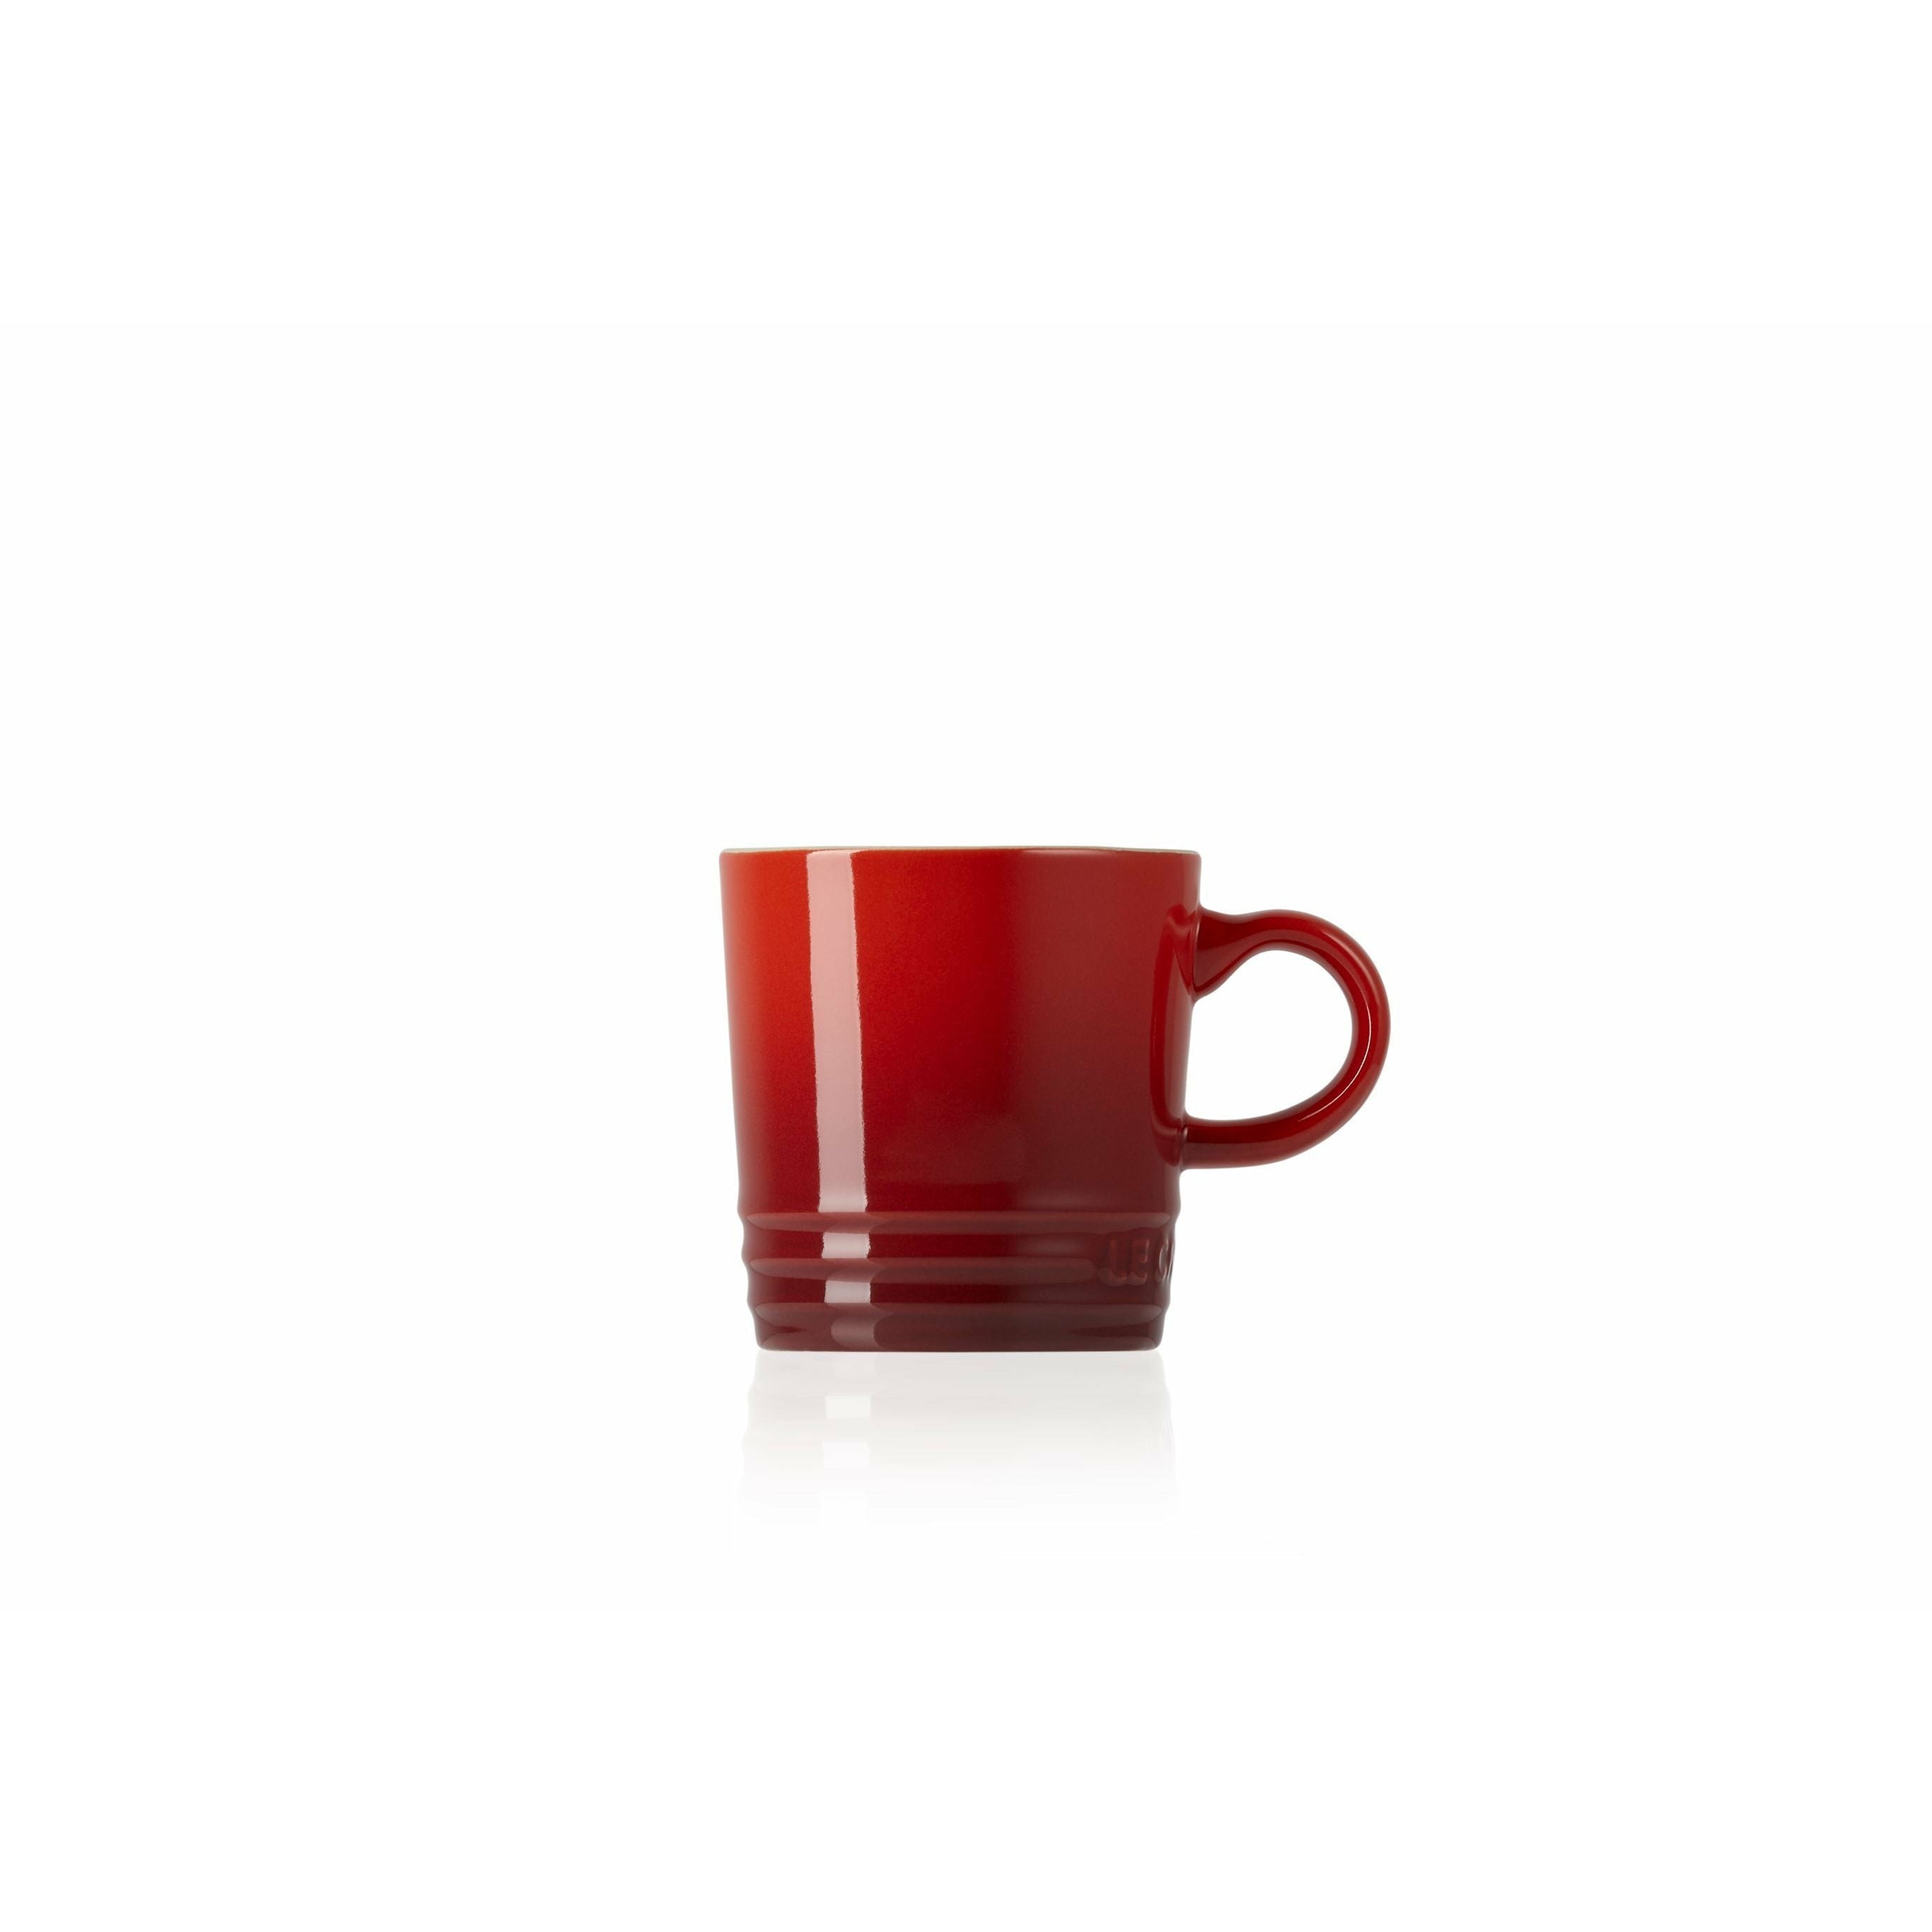 Le Creuset Espresso Cup 100 Ml, Cherry Red